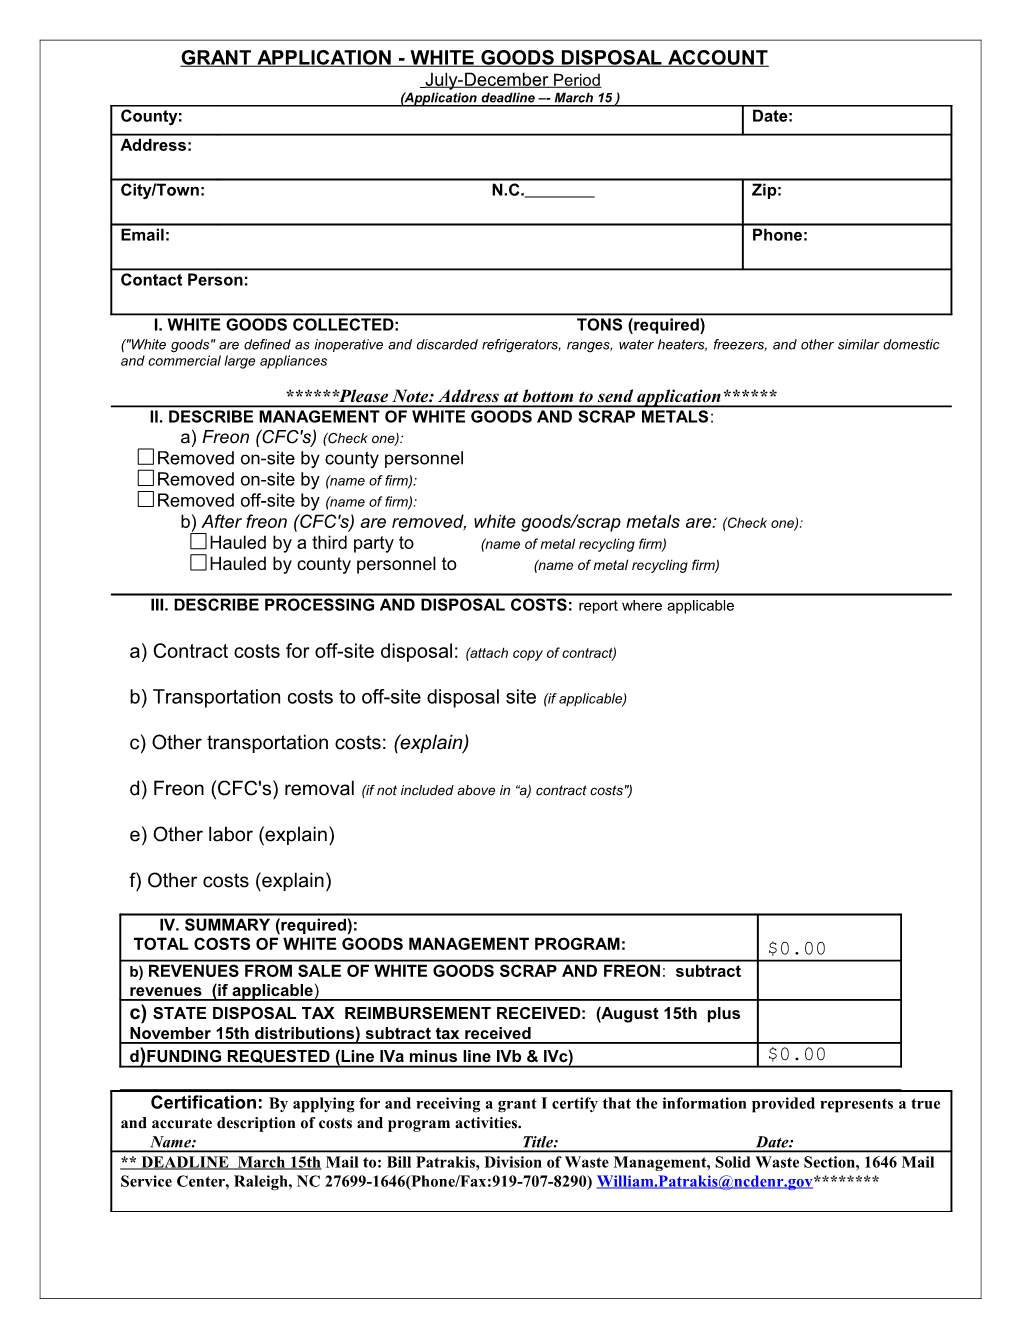 Grant Application - White Goods Disposal Account